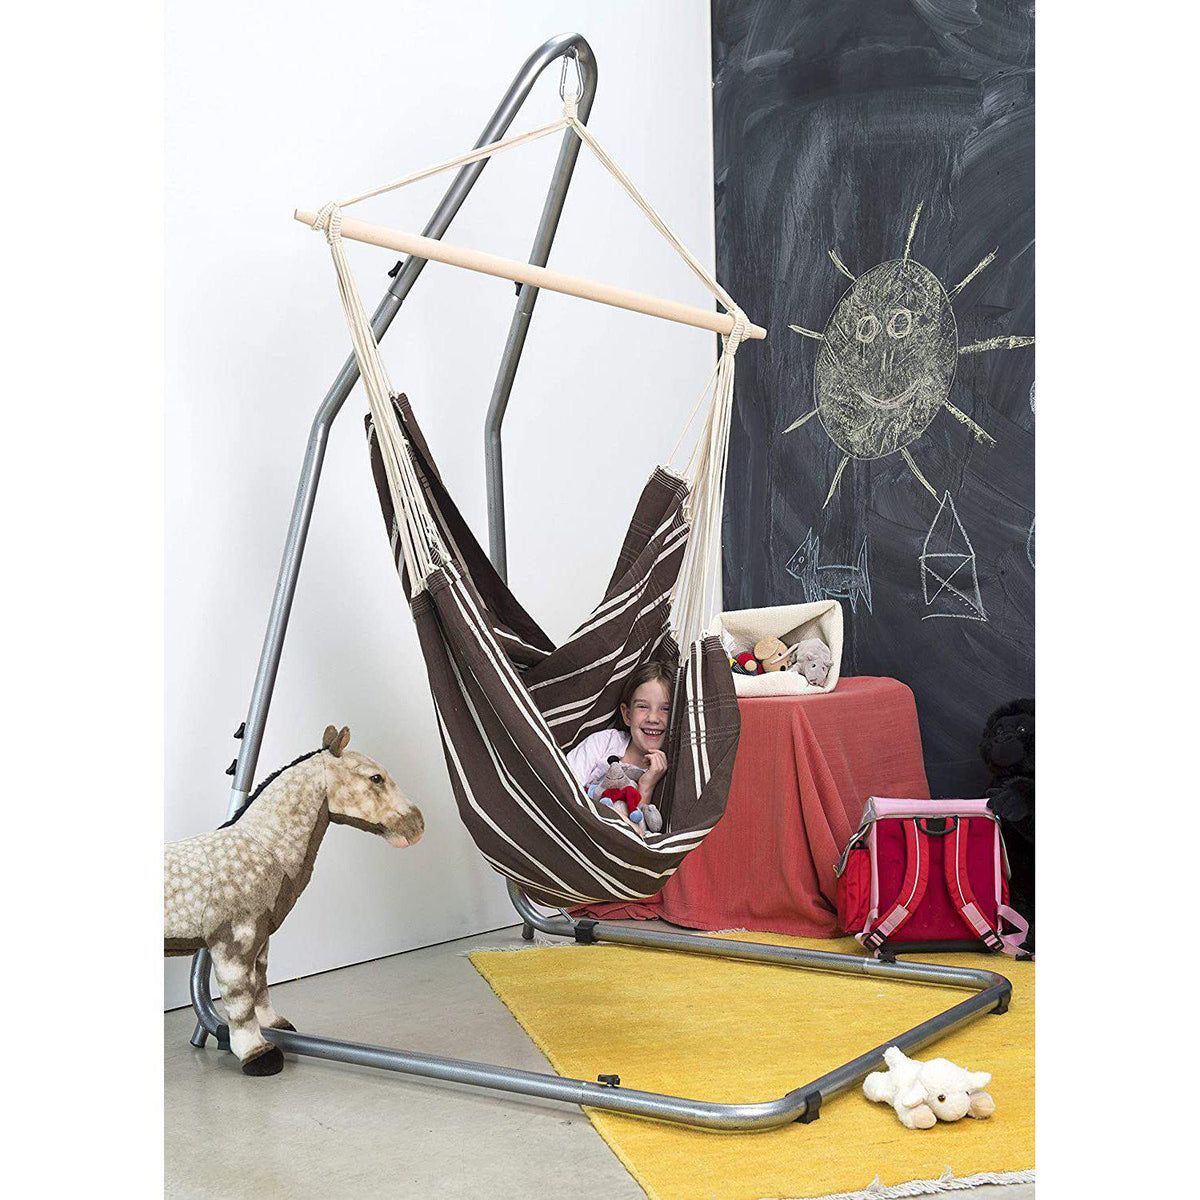 Brazil Hammock Chair, from Byer of Maine